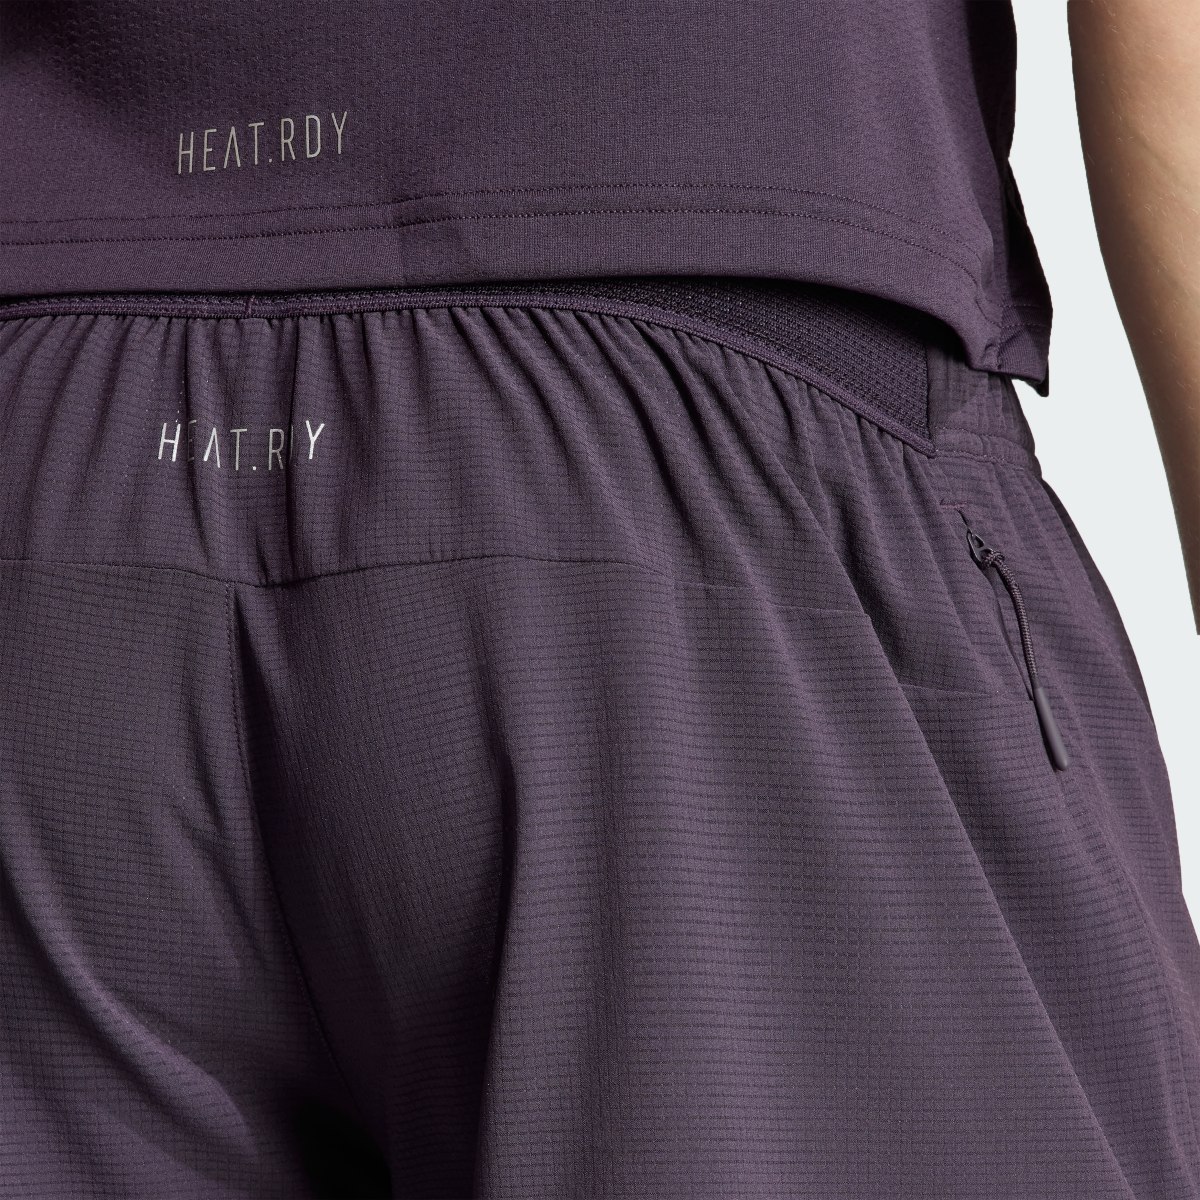 Adidas Designed for Training HIIT Workout HEAT.RDY Shorts. 6